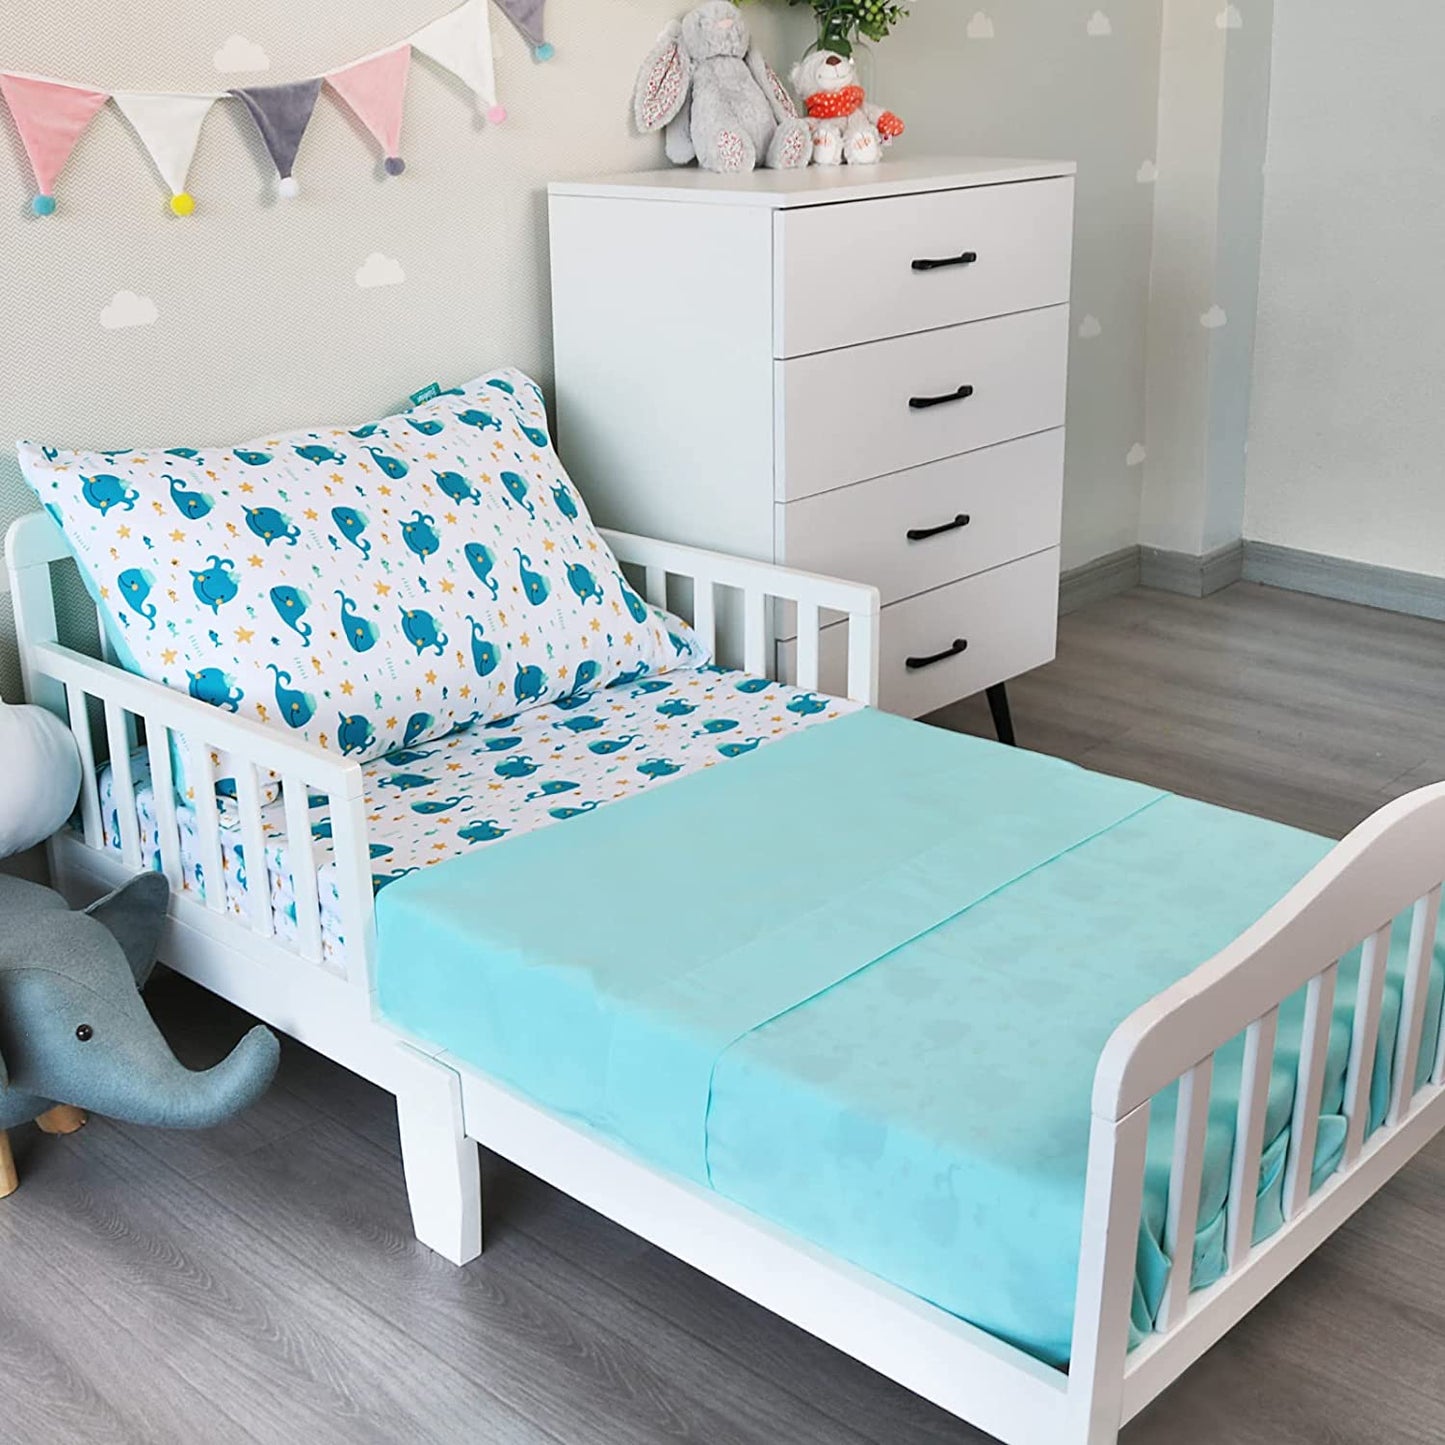 Toddler Bedding Set - 3 Pieces, Includes a Crib Fitted Sheet, Flat Sheet and Envelope Pillowcase, Soft and Breathable, Whale - Biloban Online Store